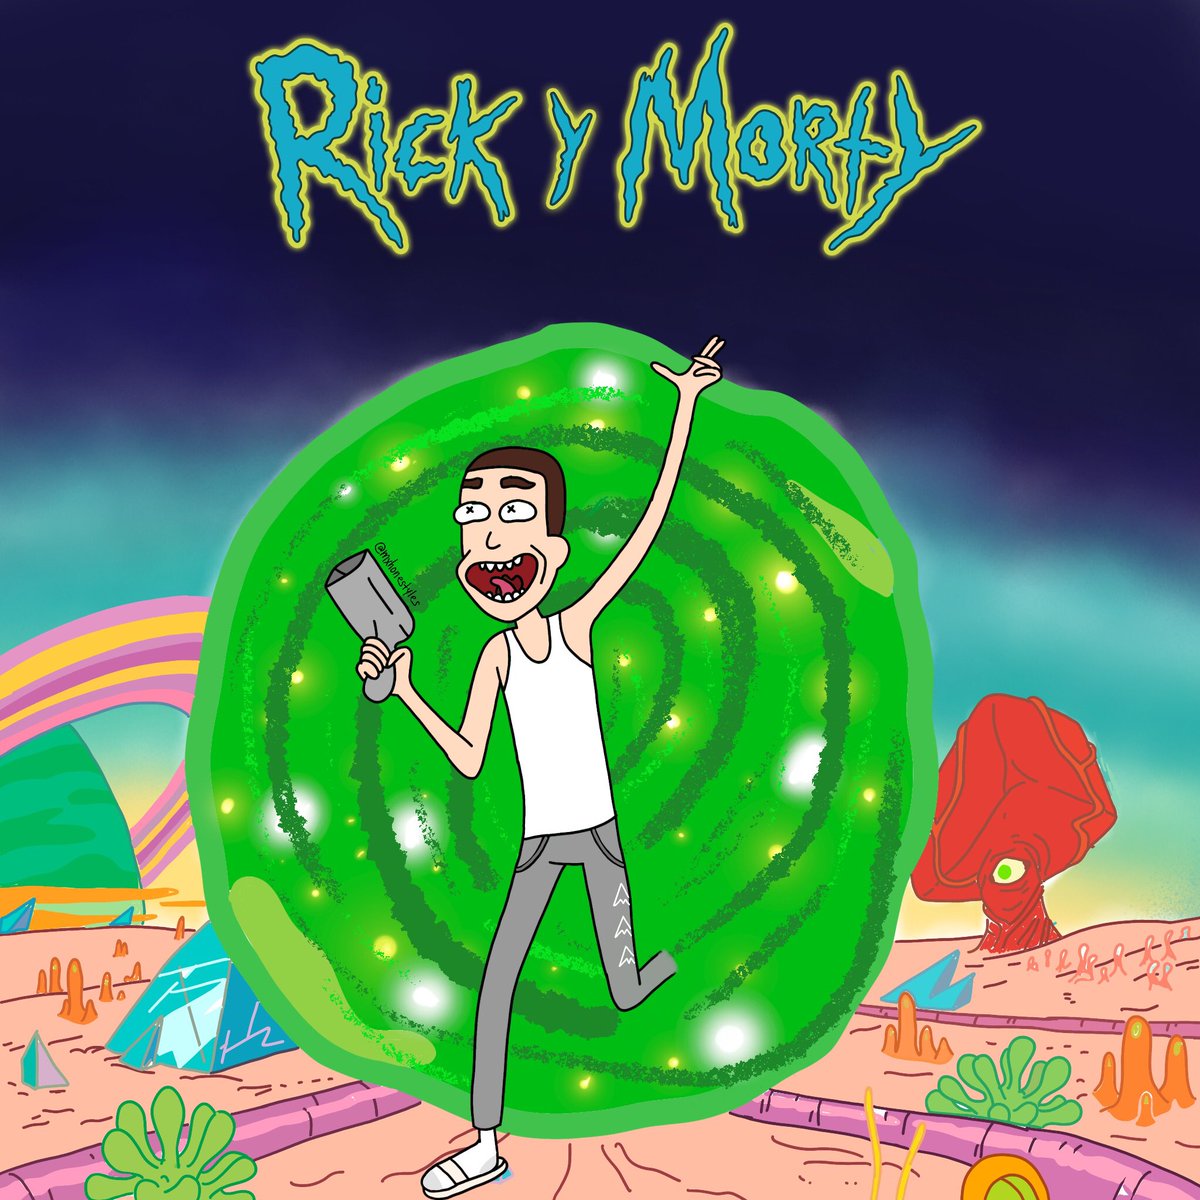  @AustinMahone as different cartoons; a thread1. Rick and Morty